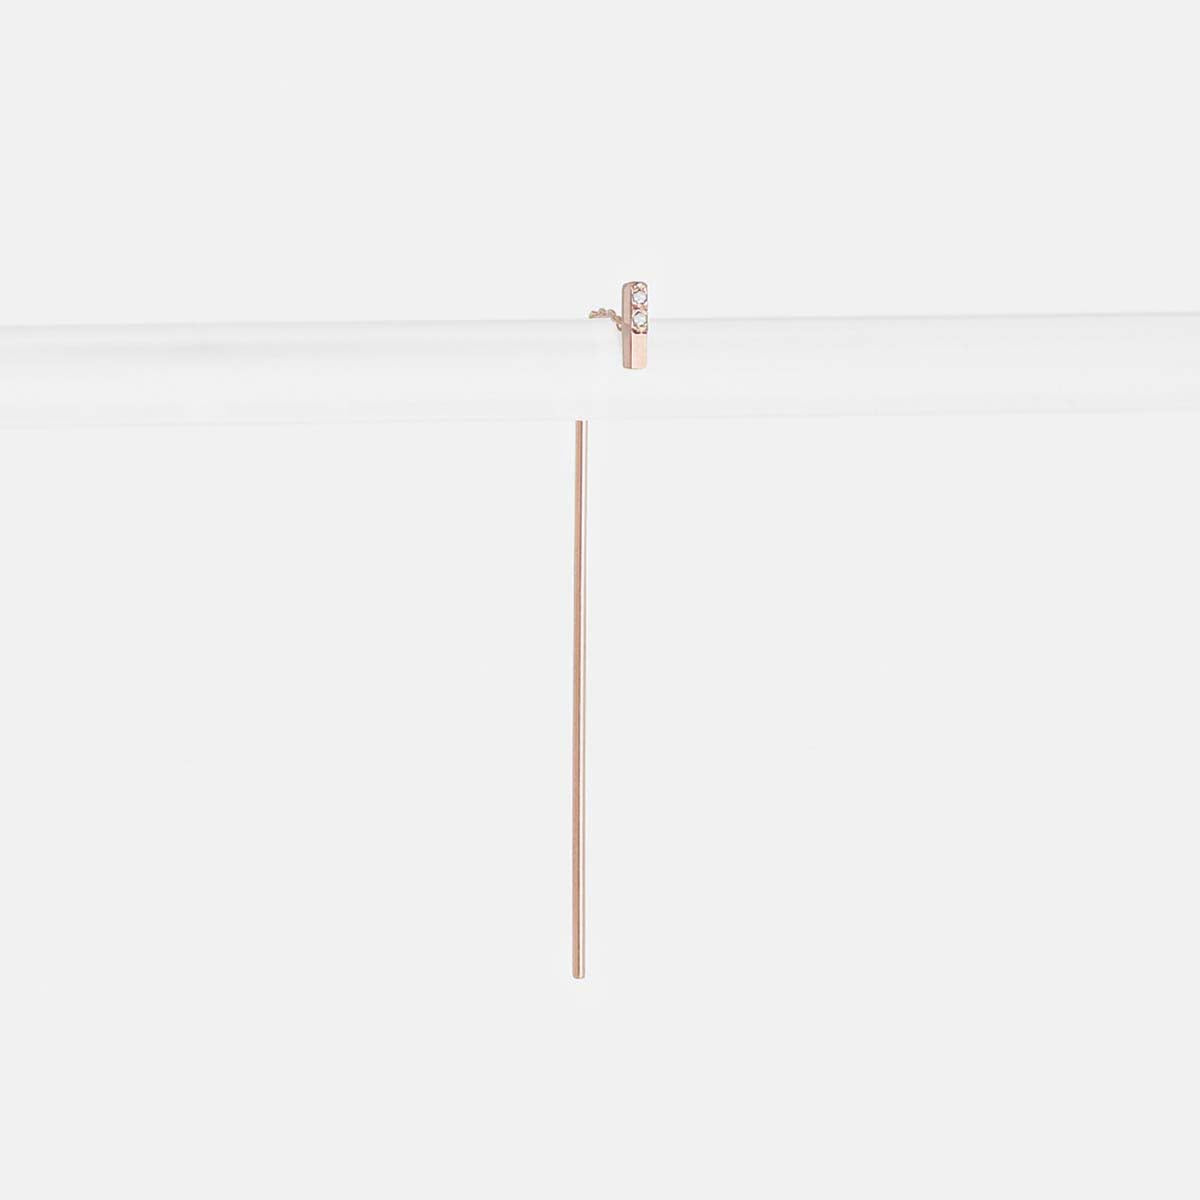 Olko Long Delicate Pull Through Earring 14k Gold set with White Diamonds By SHW Fine Jewelry NYC